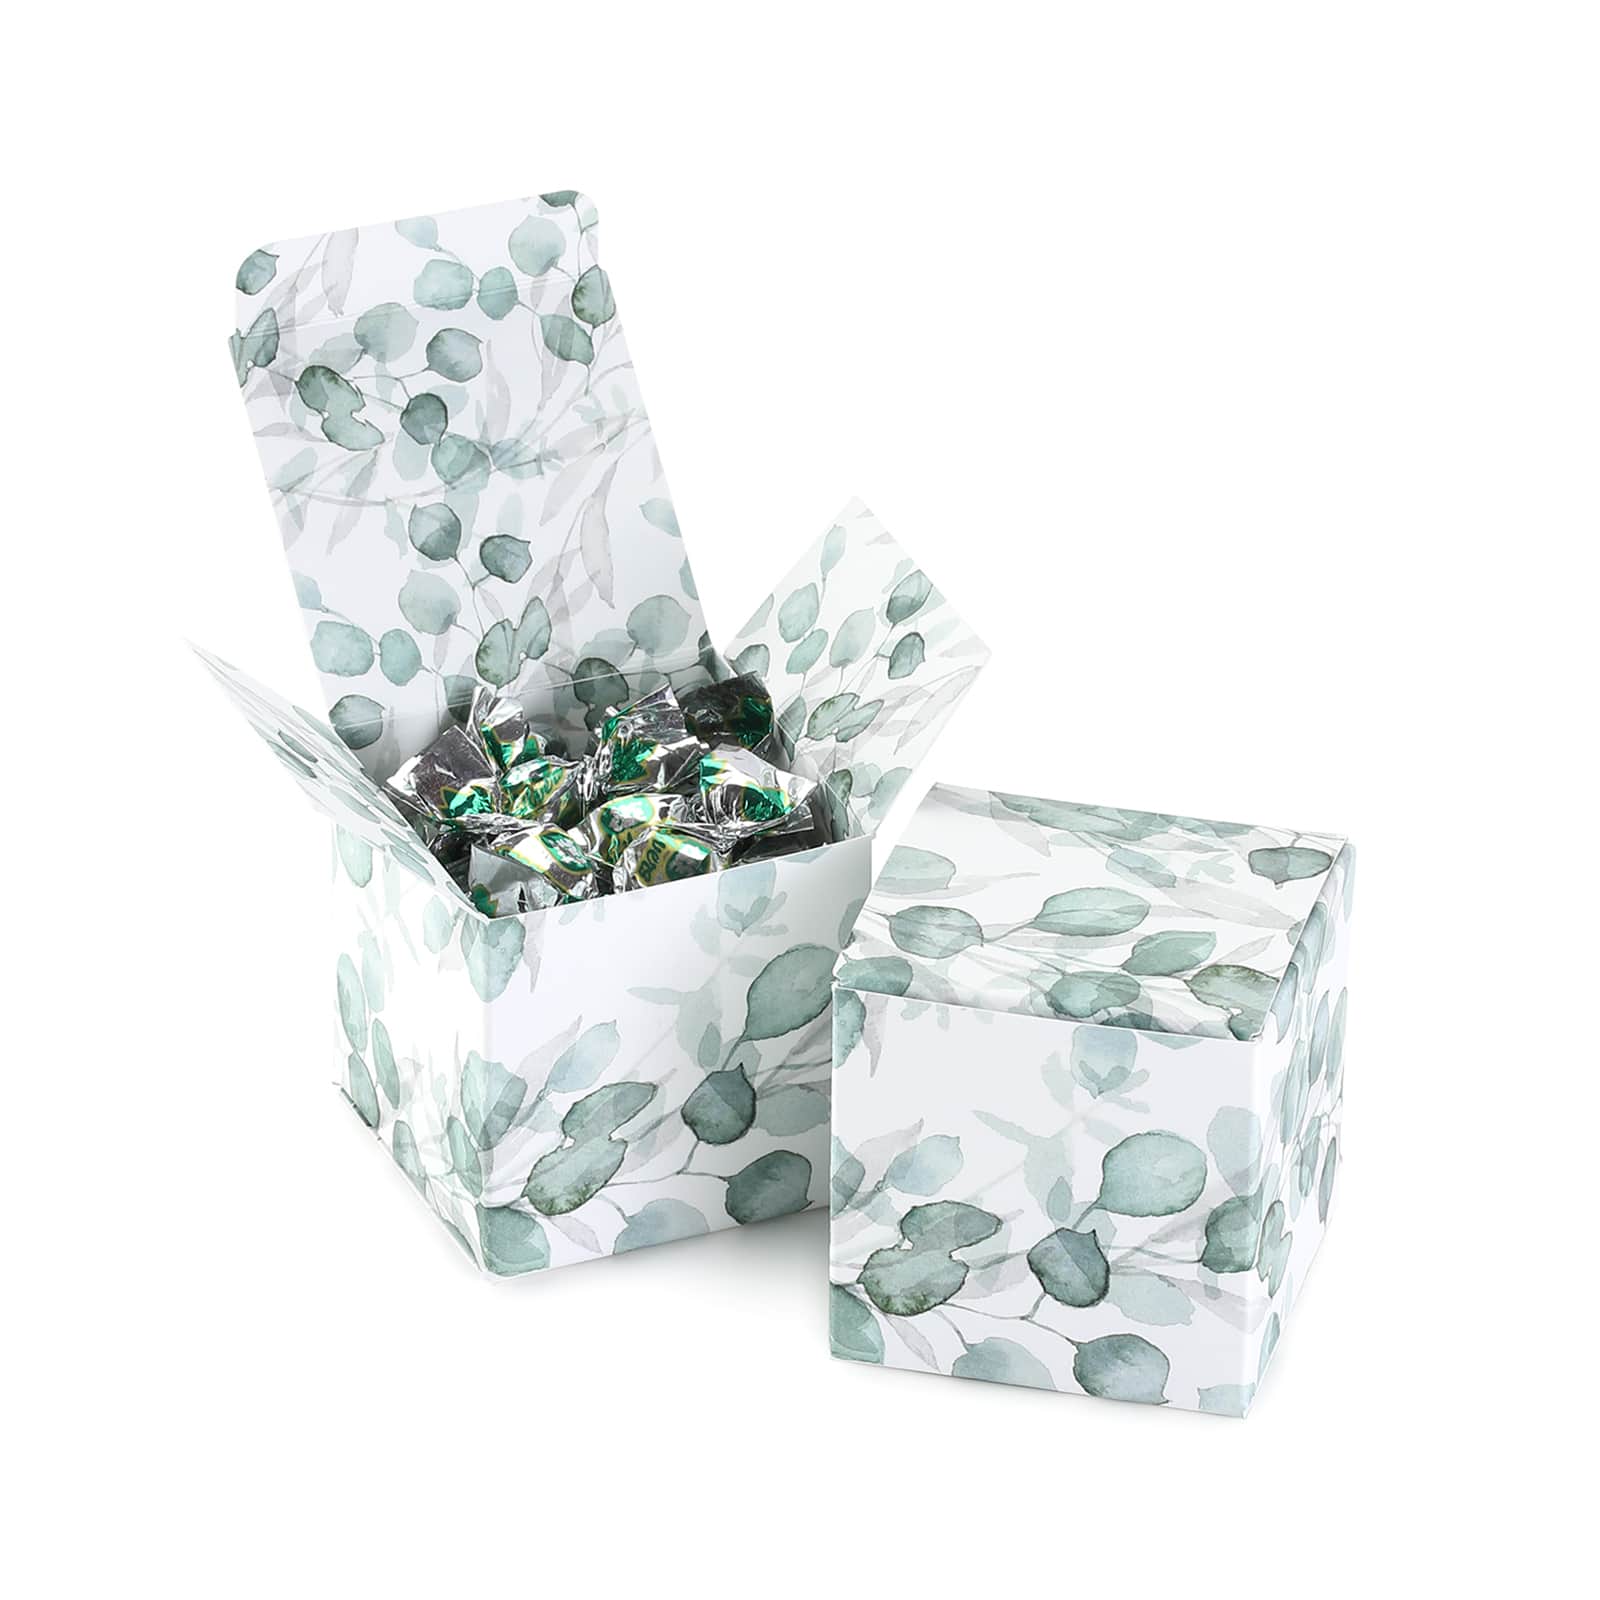 12 Packs: 20 ct. (240 total) Clear Treat Bags by Celebrate It™